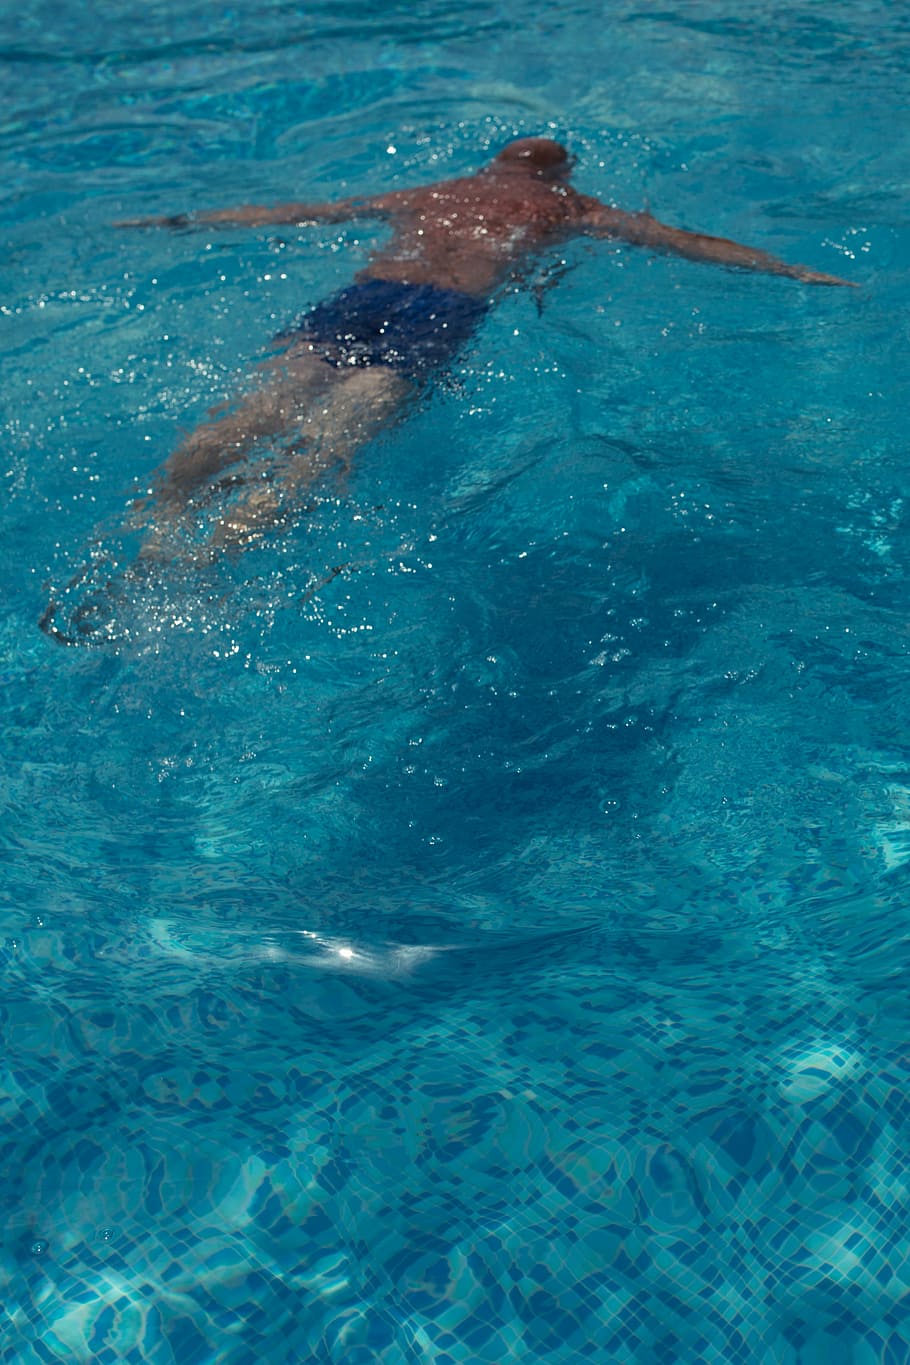 blue, ripped, water, swimming, pool, summer, vacation, blue water, sport, swimming Pool